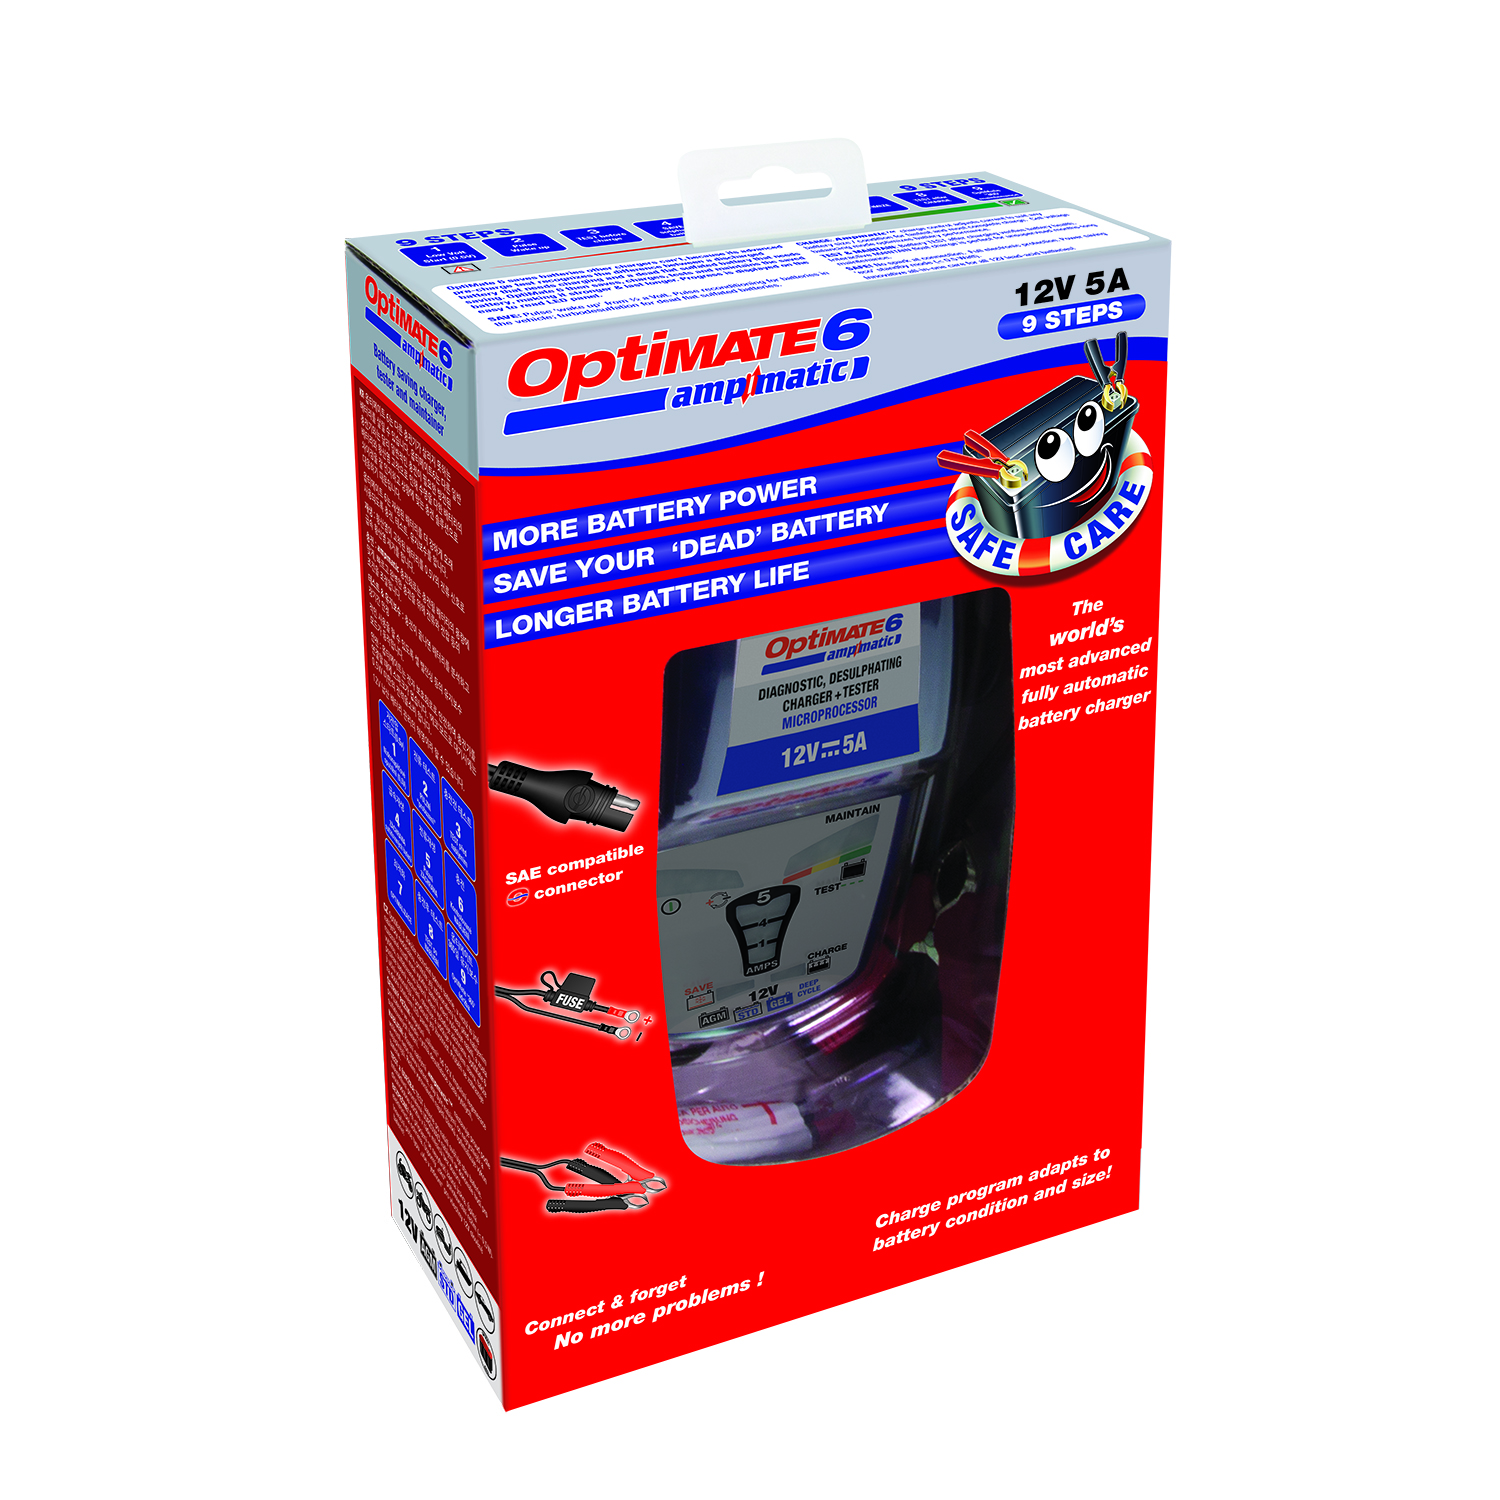 OptiMate 6 AmpMatic 12V Motorcycle Car Smart Automatic Battery Charger Optimiser 